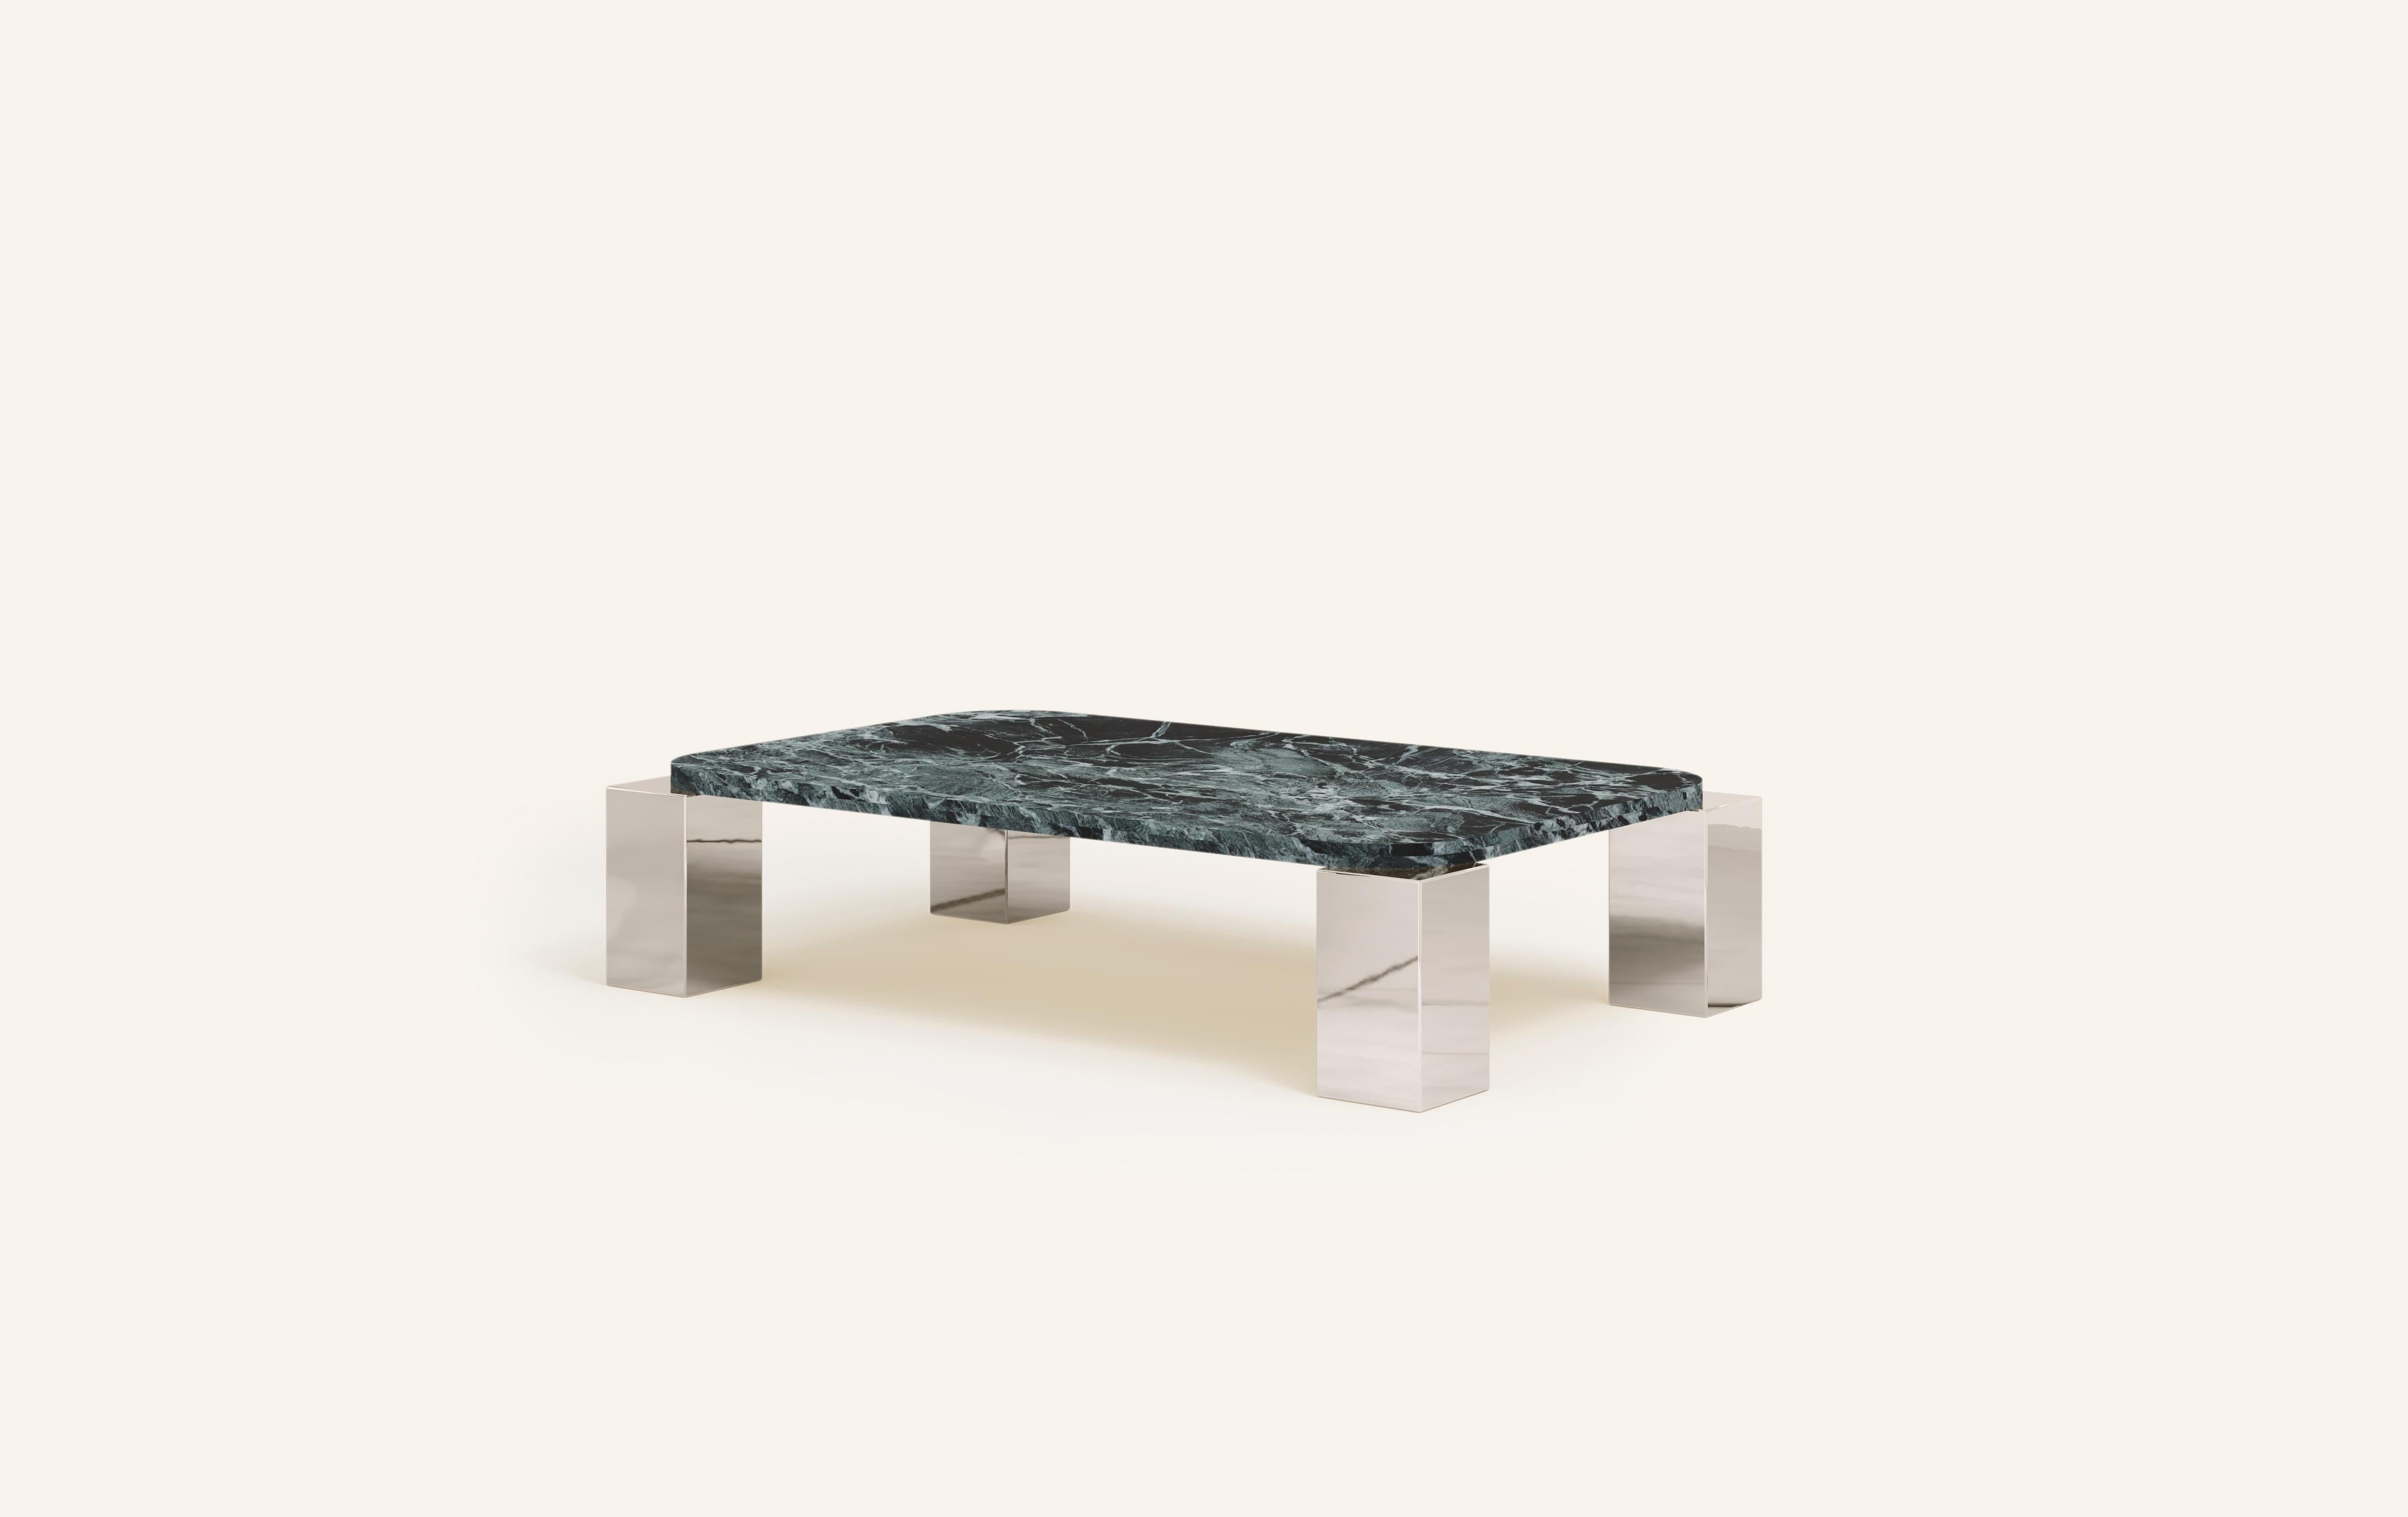 Organic Modern FORM(LA) Cubo Rectangle Coffee Table 62”L x 38”W x 14”H Verde Marble & Chrome For Sale